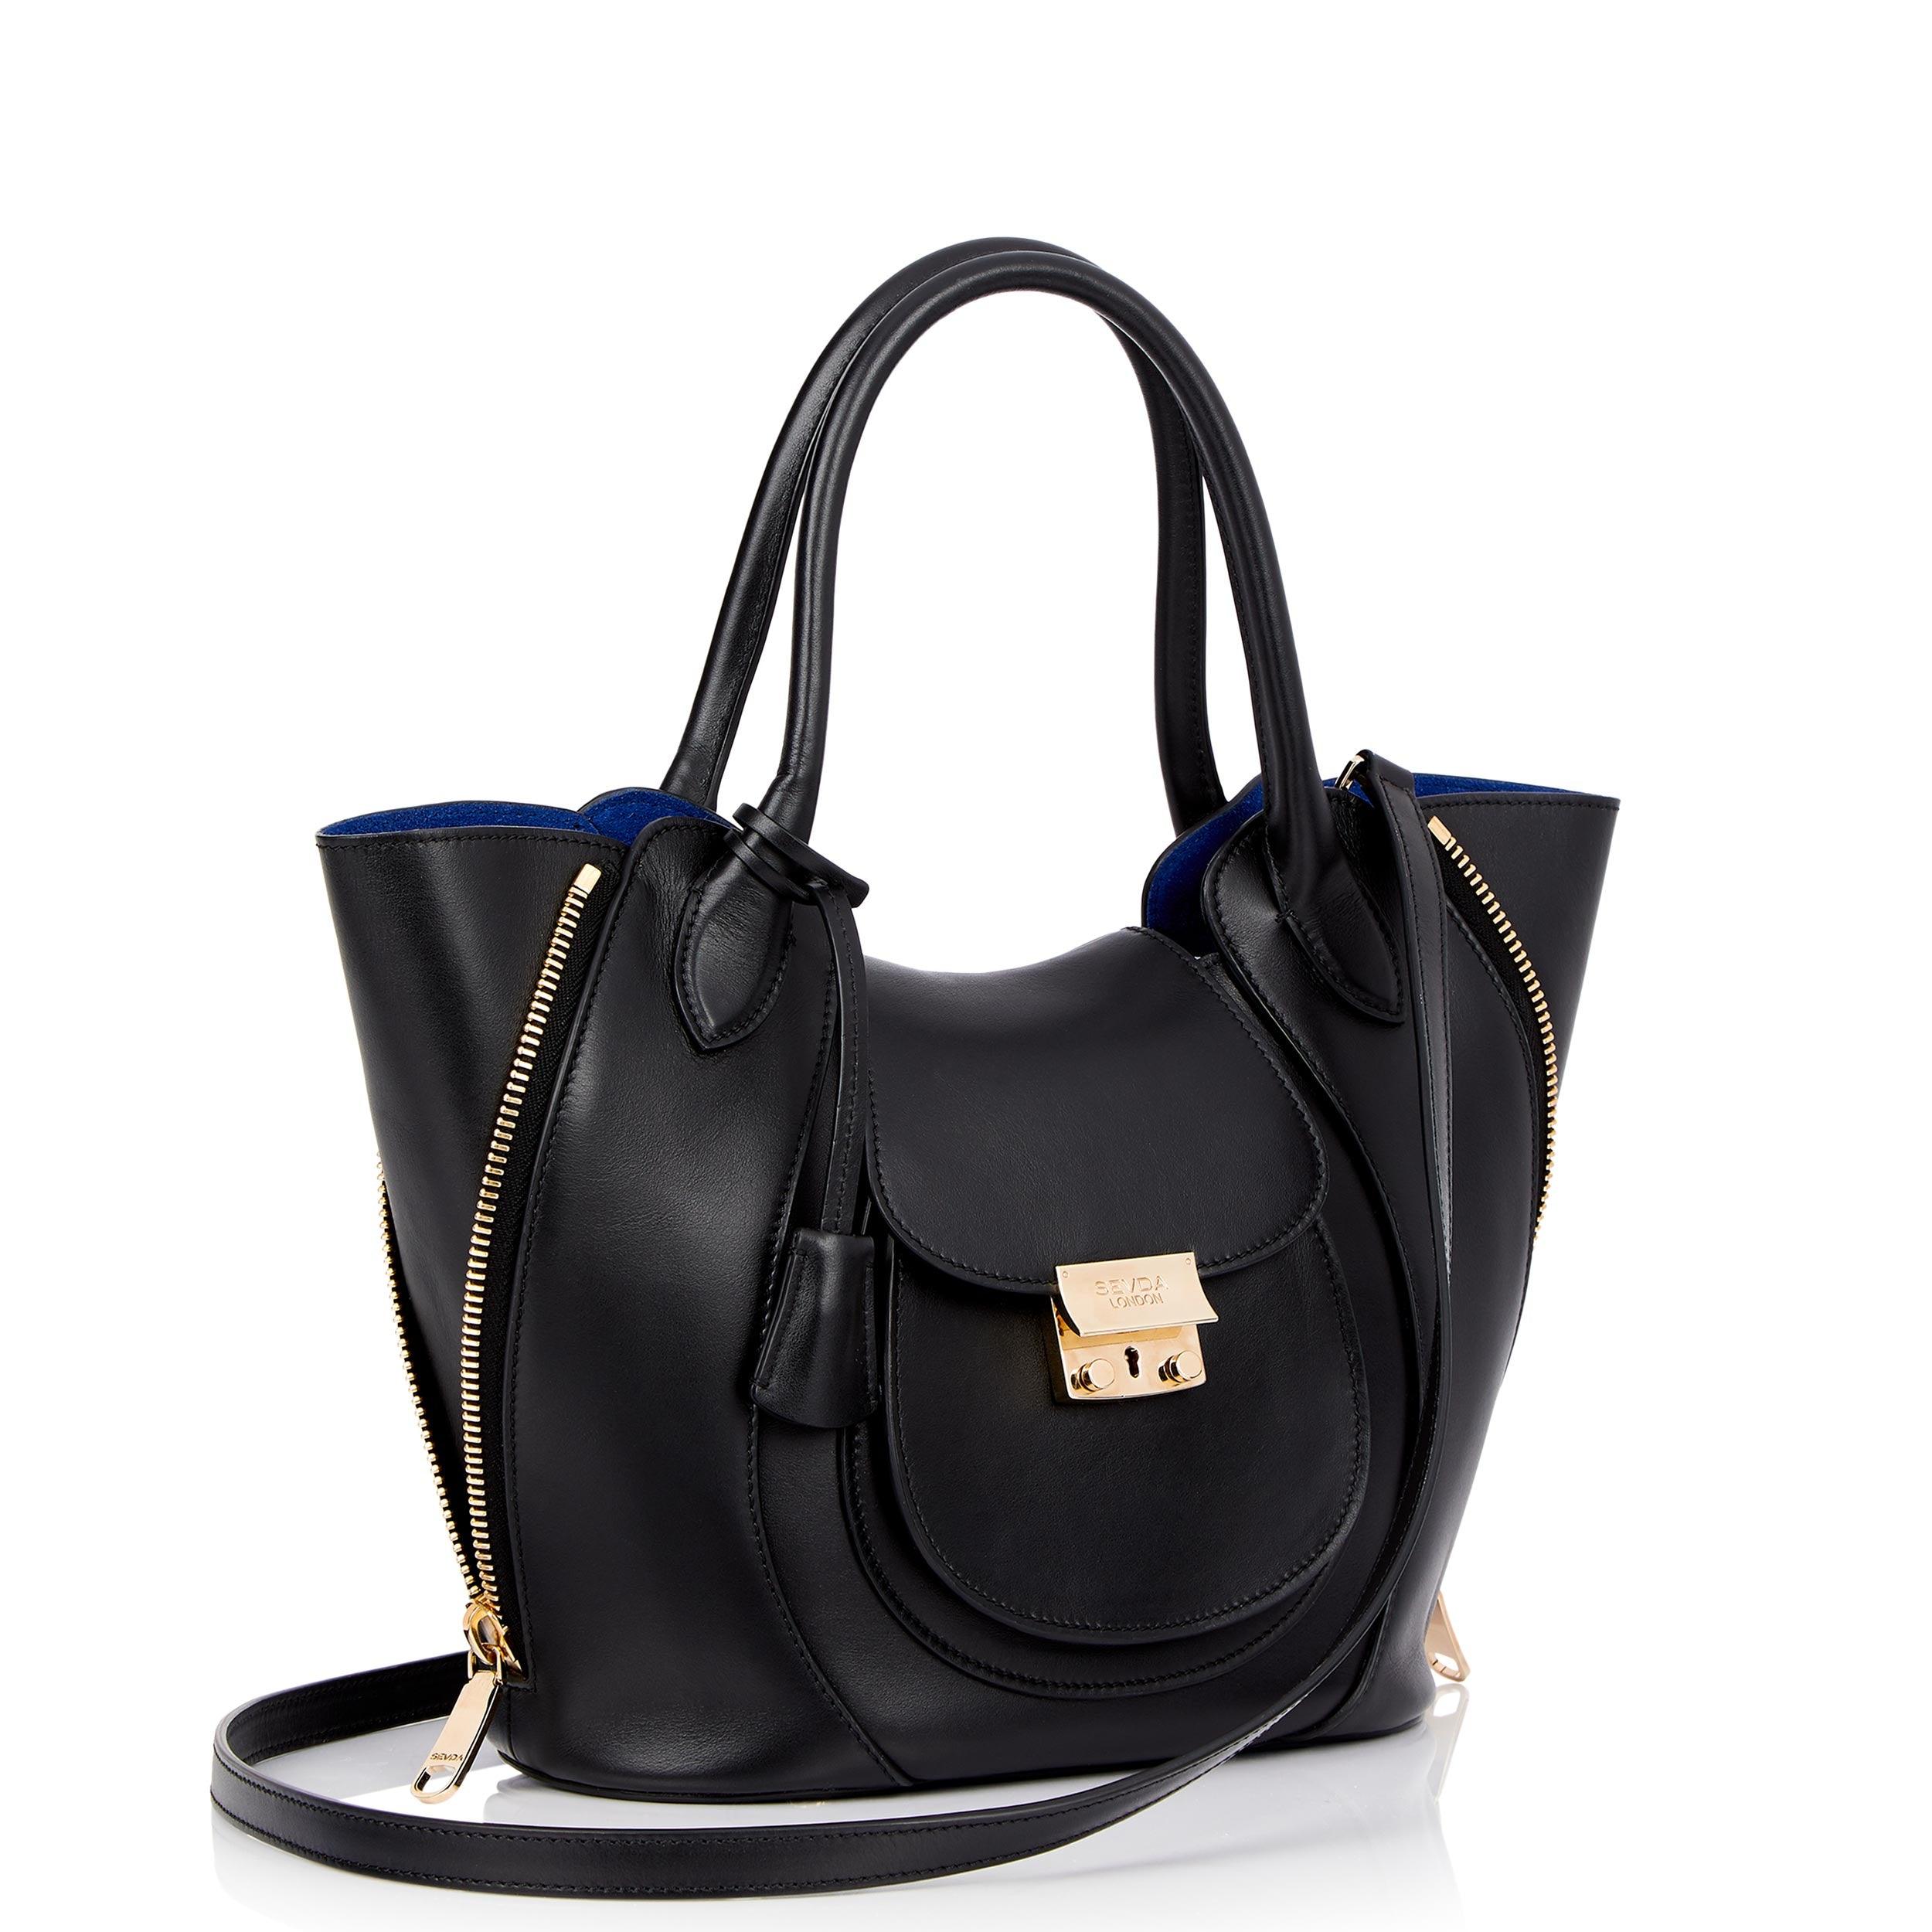 Black Leather Luxury Designer Bag with Blue Suede Lining - Fusion of London's style and Italian craftsmanship.